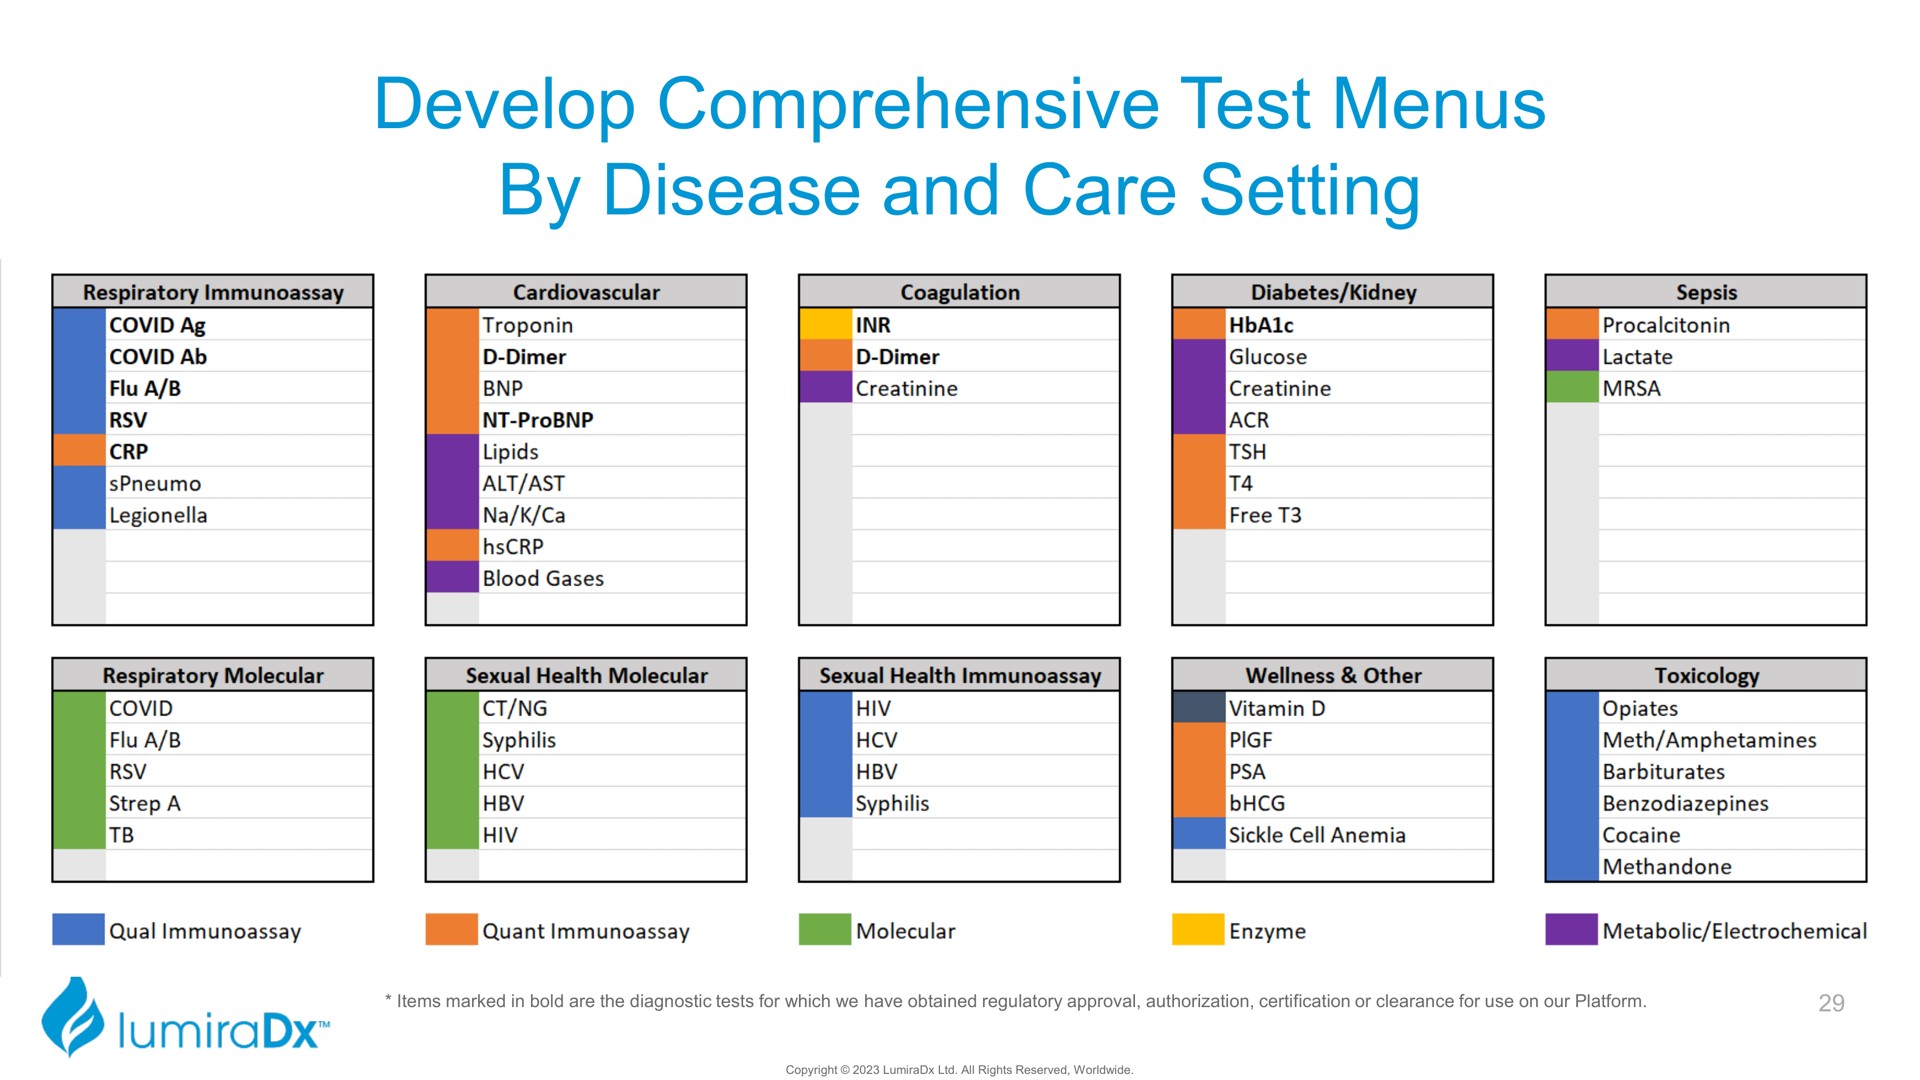 develop comprehensive test menus by disease and care setting | LumiraDx